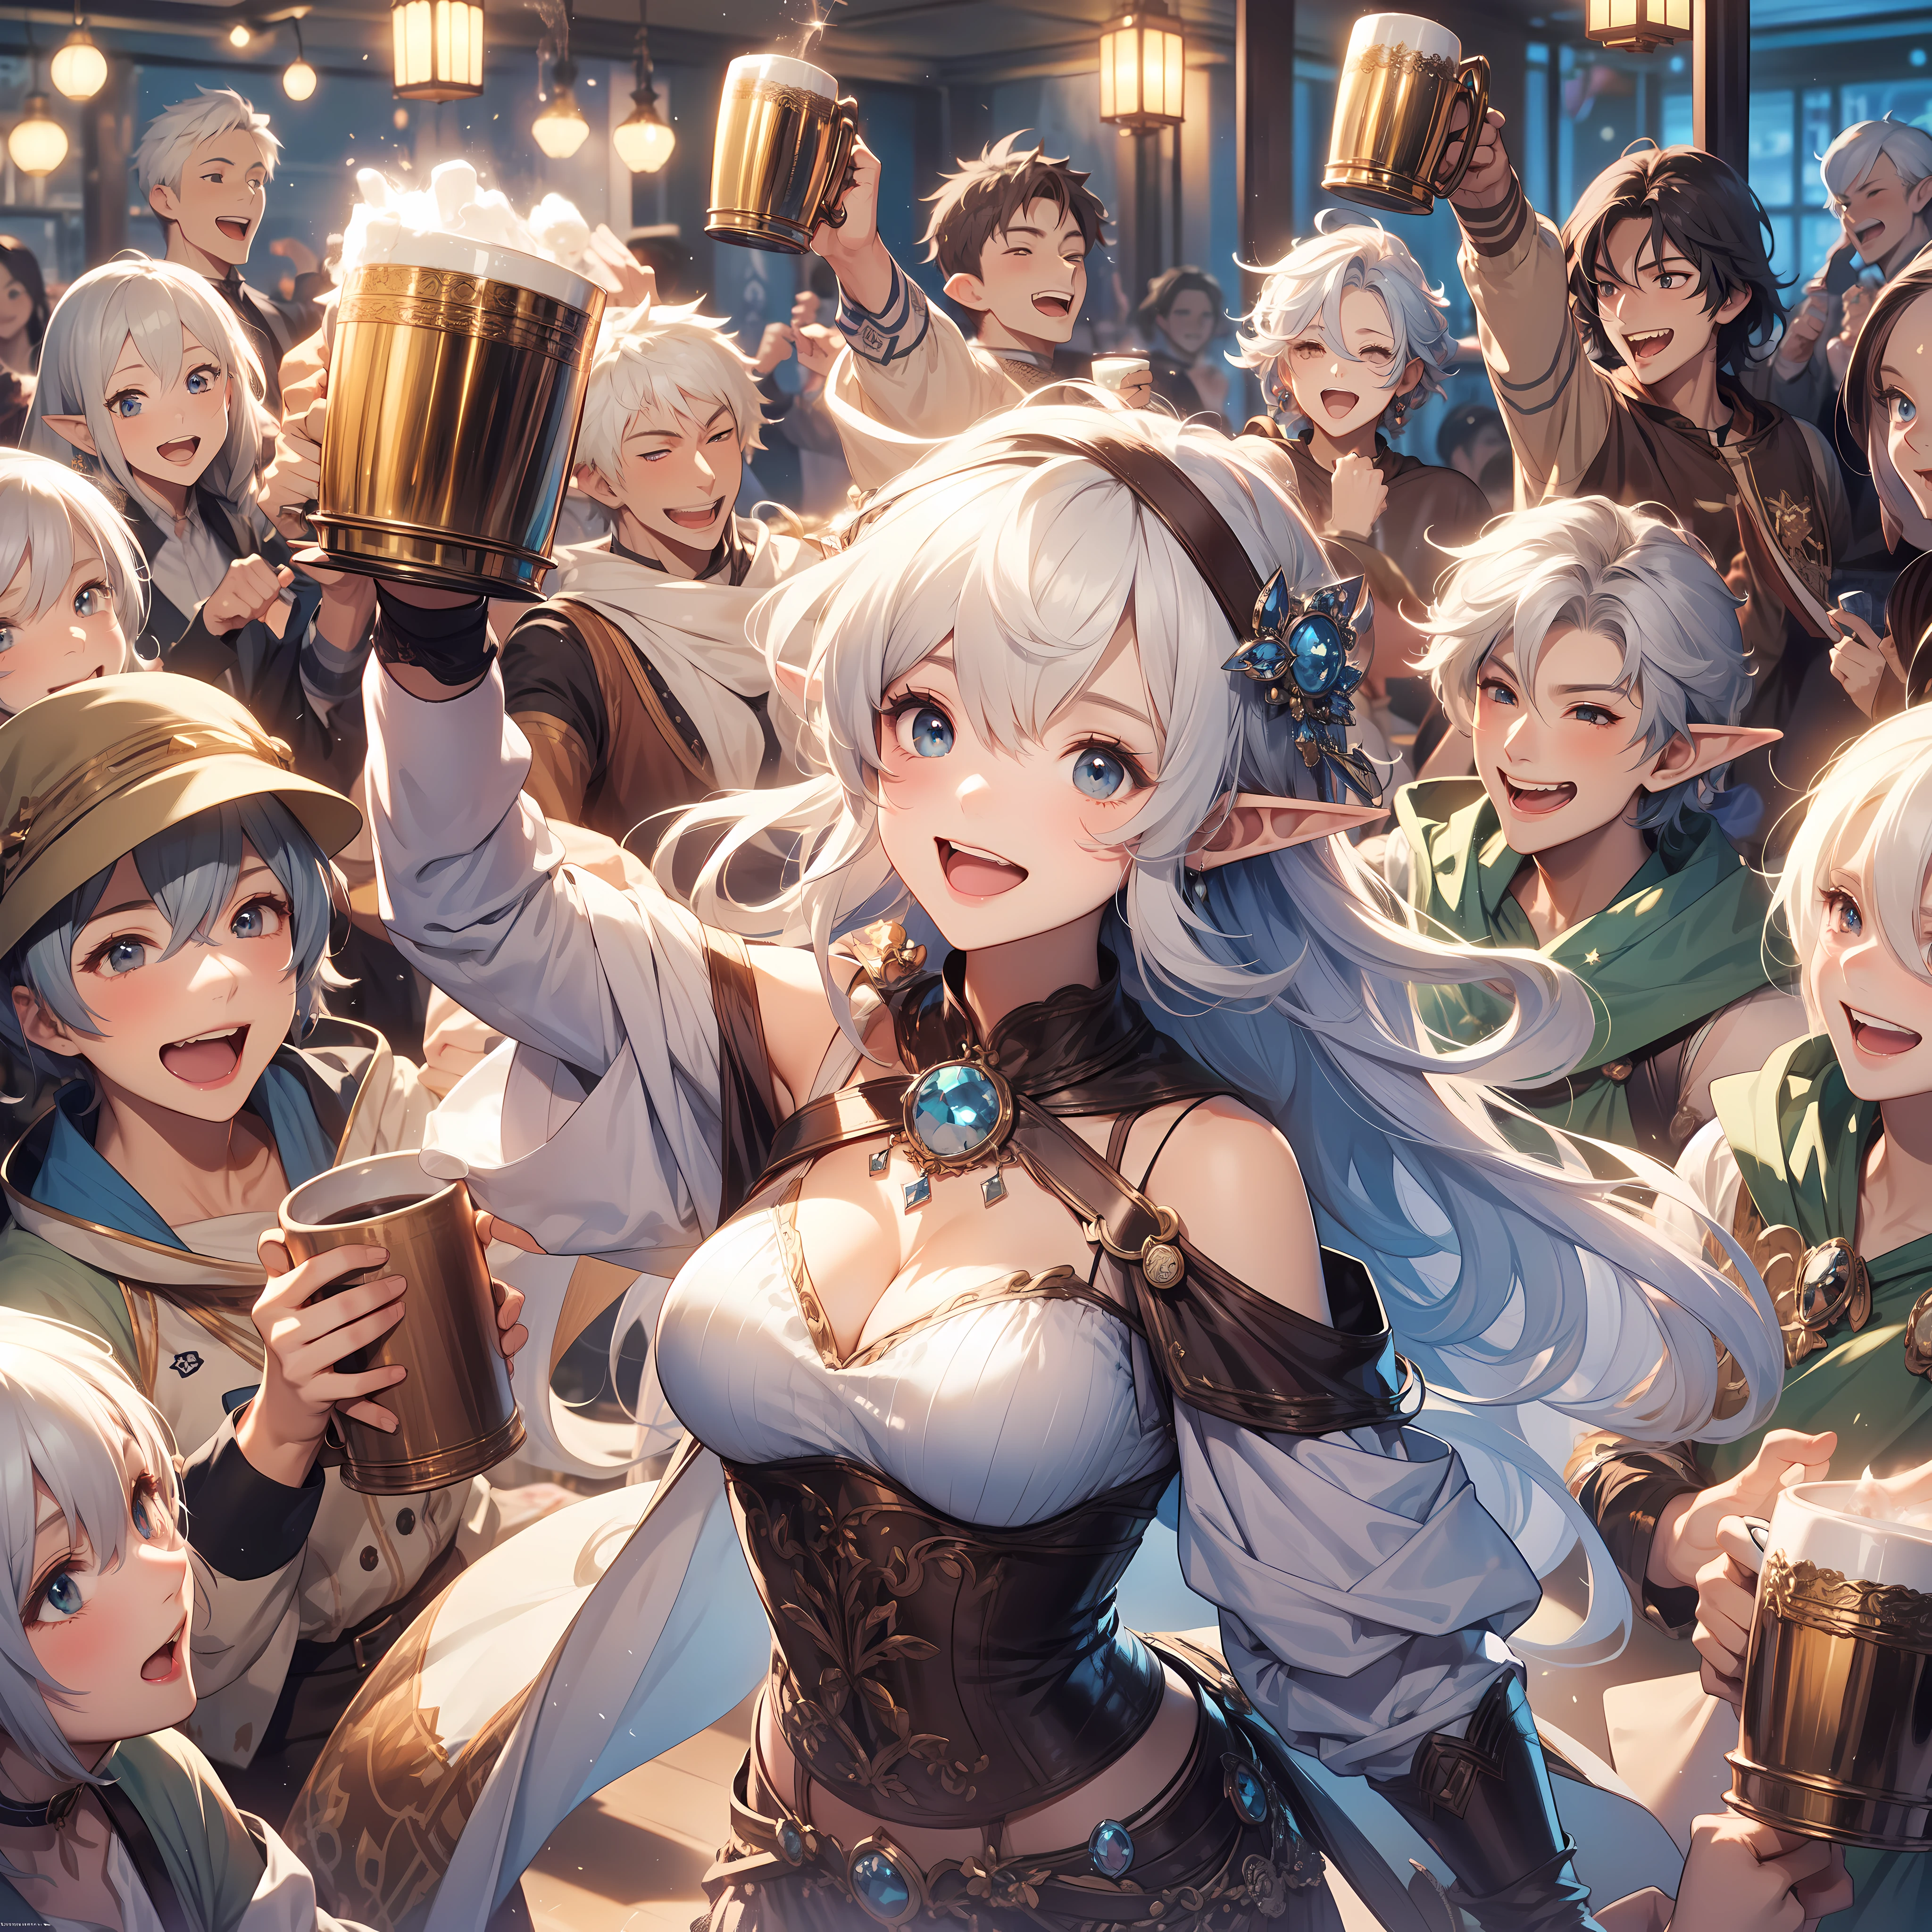 In the lively atmosphere of a bar, a white-haired and blue-eyes elf girl stands at the center, raising her mug high. Around her, all the adventurers present join in, raising their mugs in celebration of their victory. The elf girl is surrounded by the happy faces of her companions, embodying the joy and camaraderie of their shared success, (celebratory atmosphere), (raising mugs in unison), (victorious celebration), by Mikimoto Haruhiko 